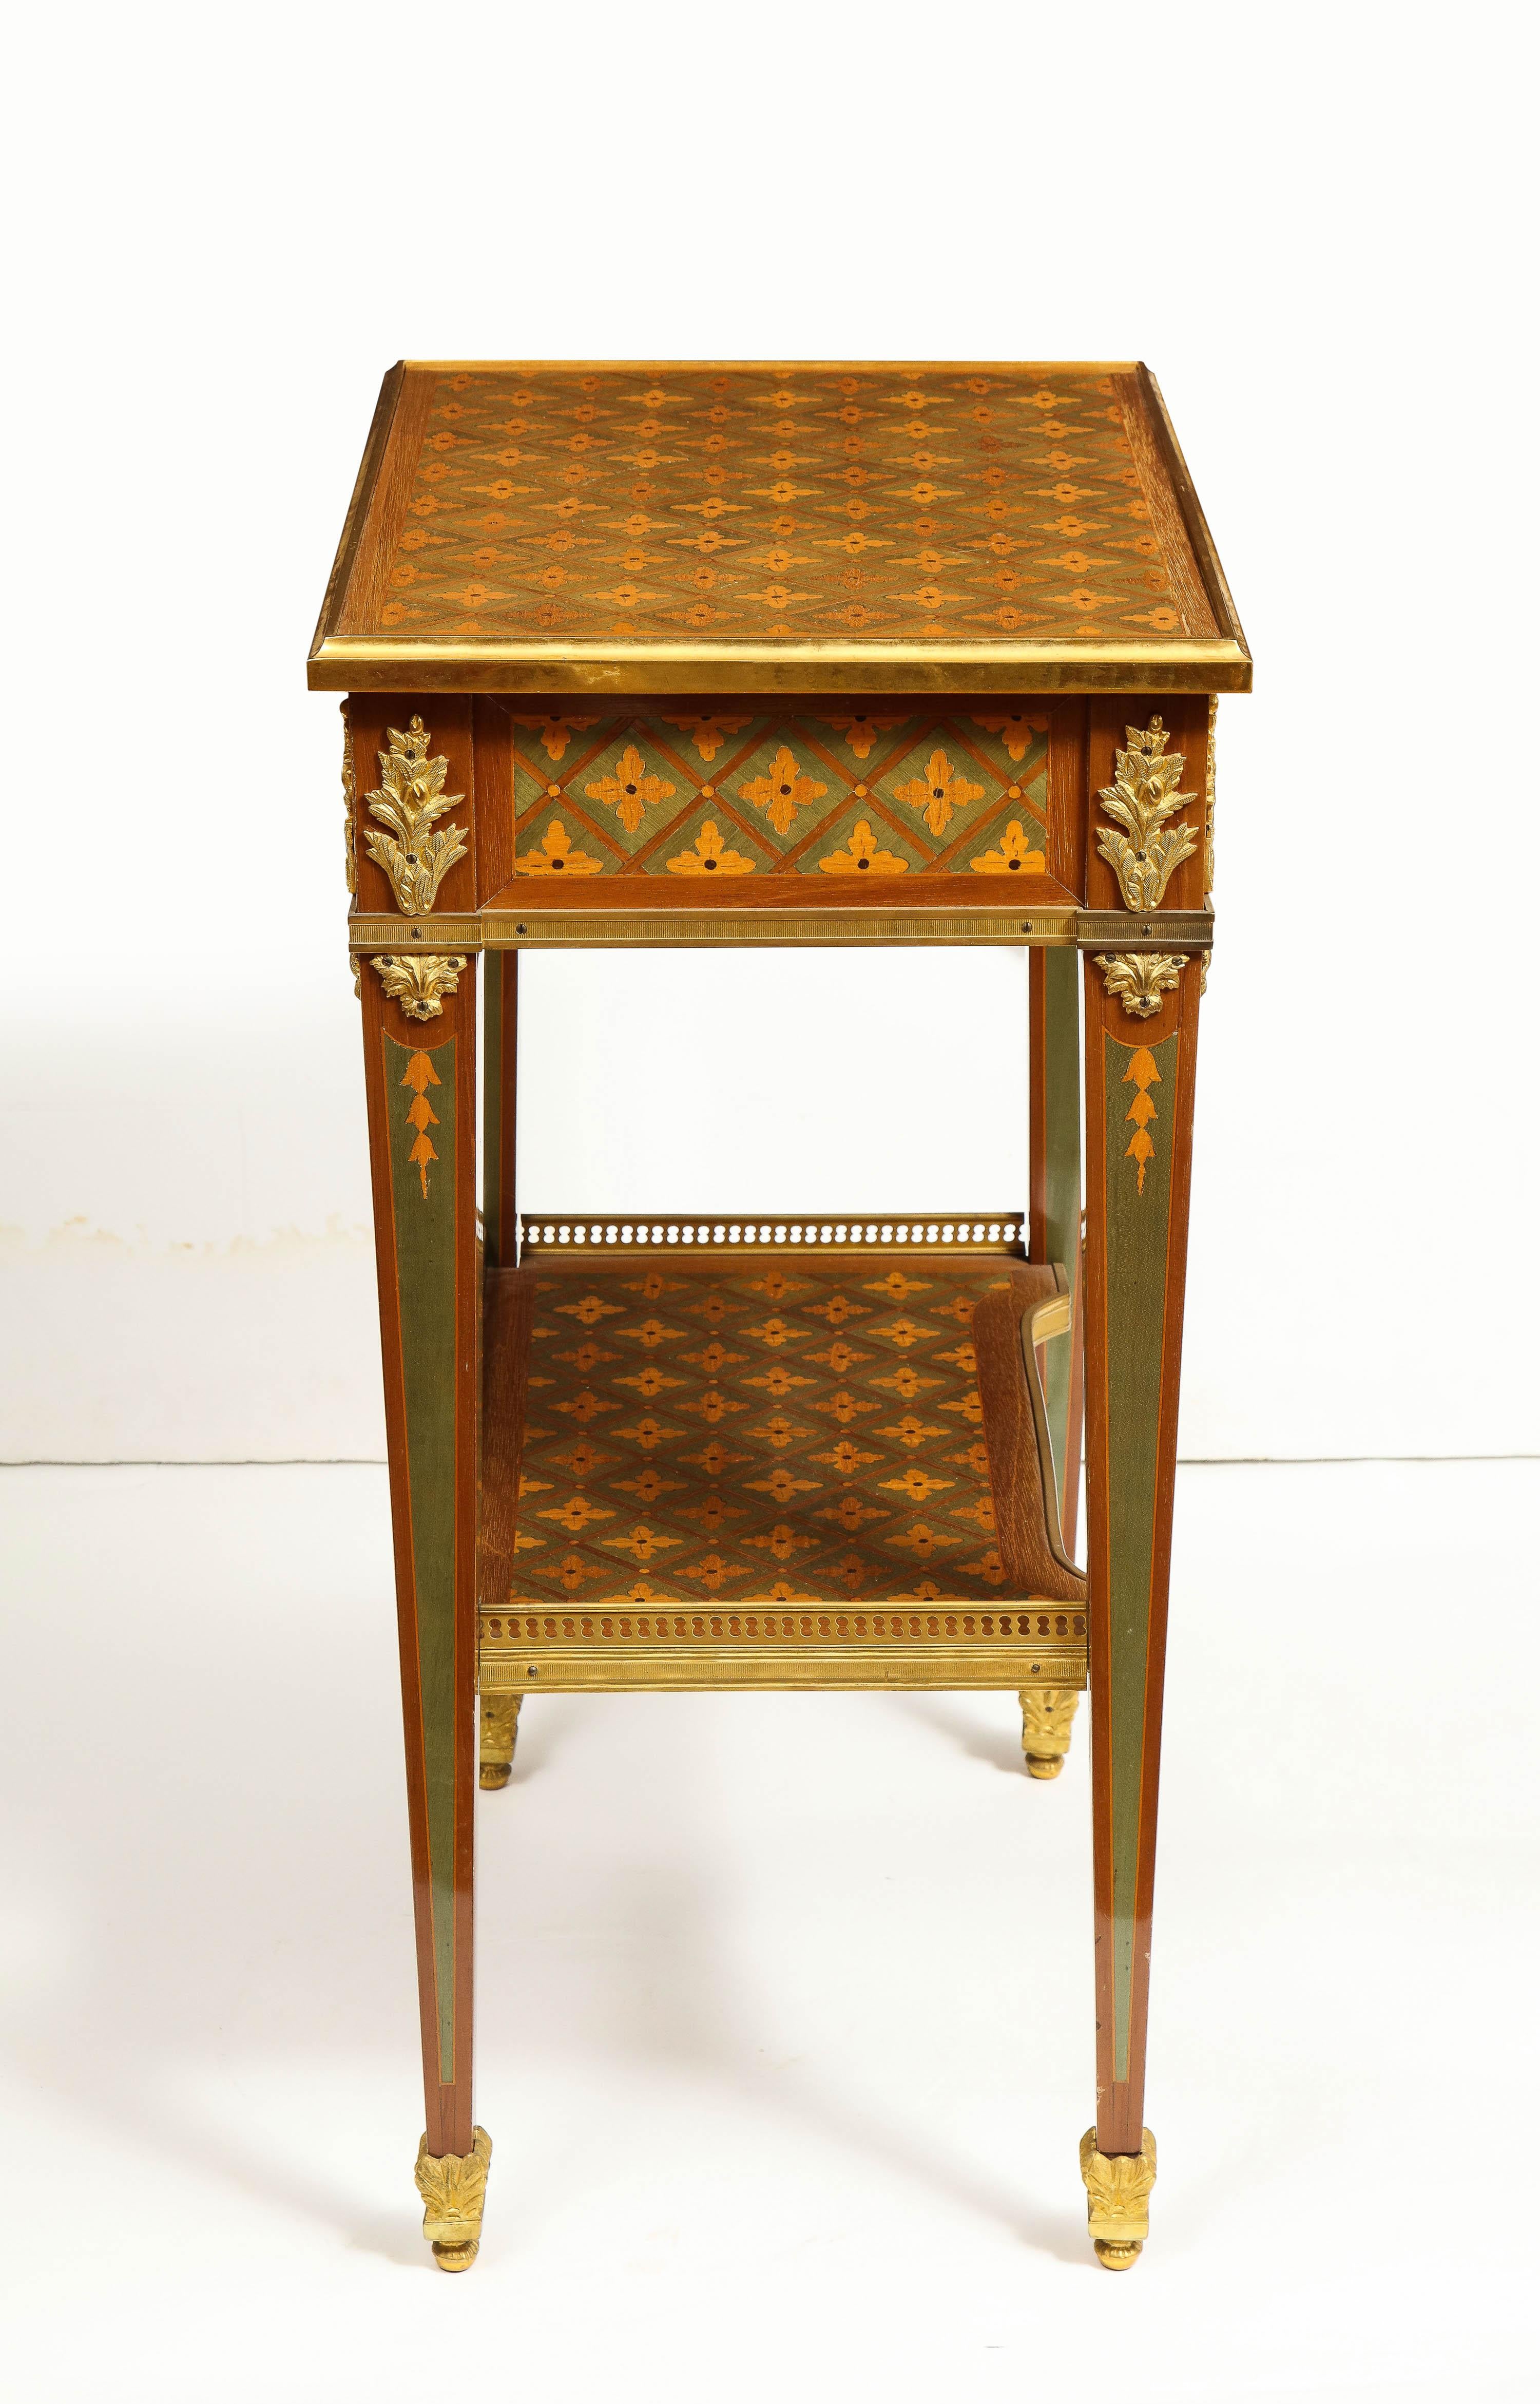 Exceptional Pair of French Ormolu-Mounted Parquetry and Marquetry Side Tables For Sale 11